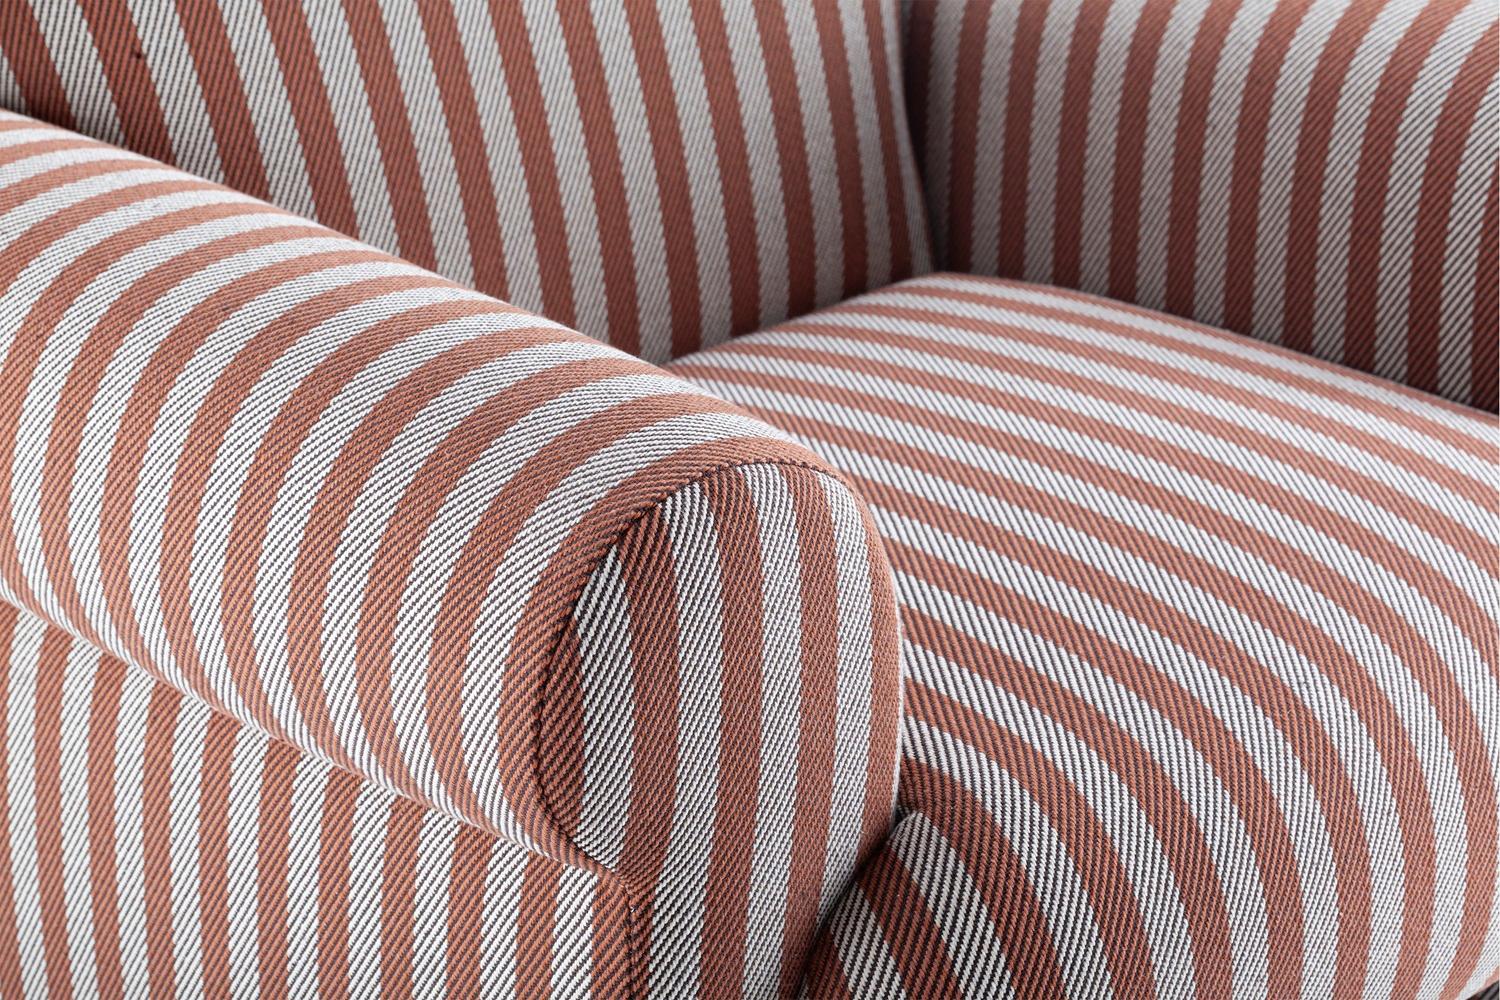 Hand-Crafted DOOQ! NEW! Organic Modern Oscar Armchair, Striped in Brown and Beige Fabric For Sale